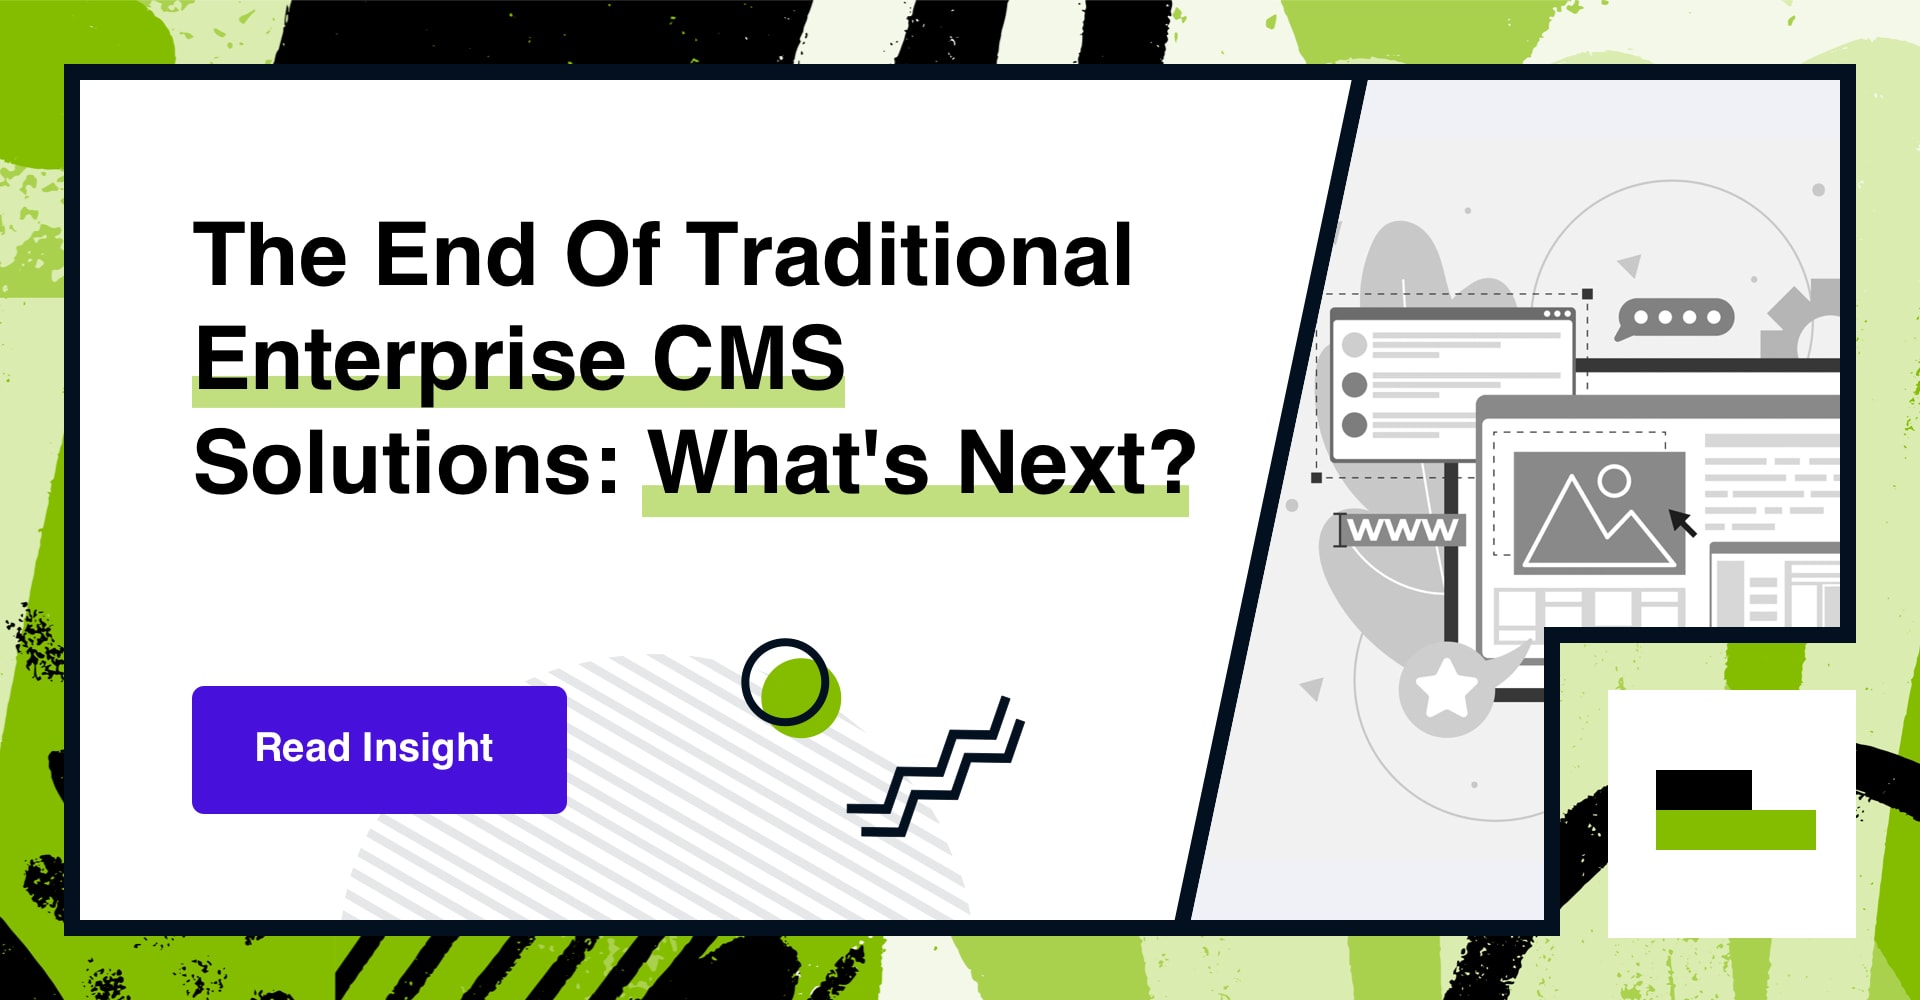 The End Of Traditional Enterprise CMS Solutions: What's Next?